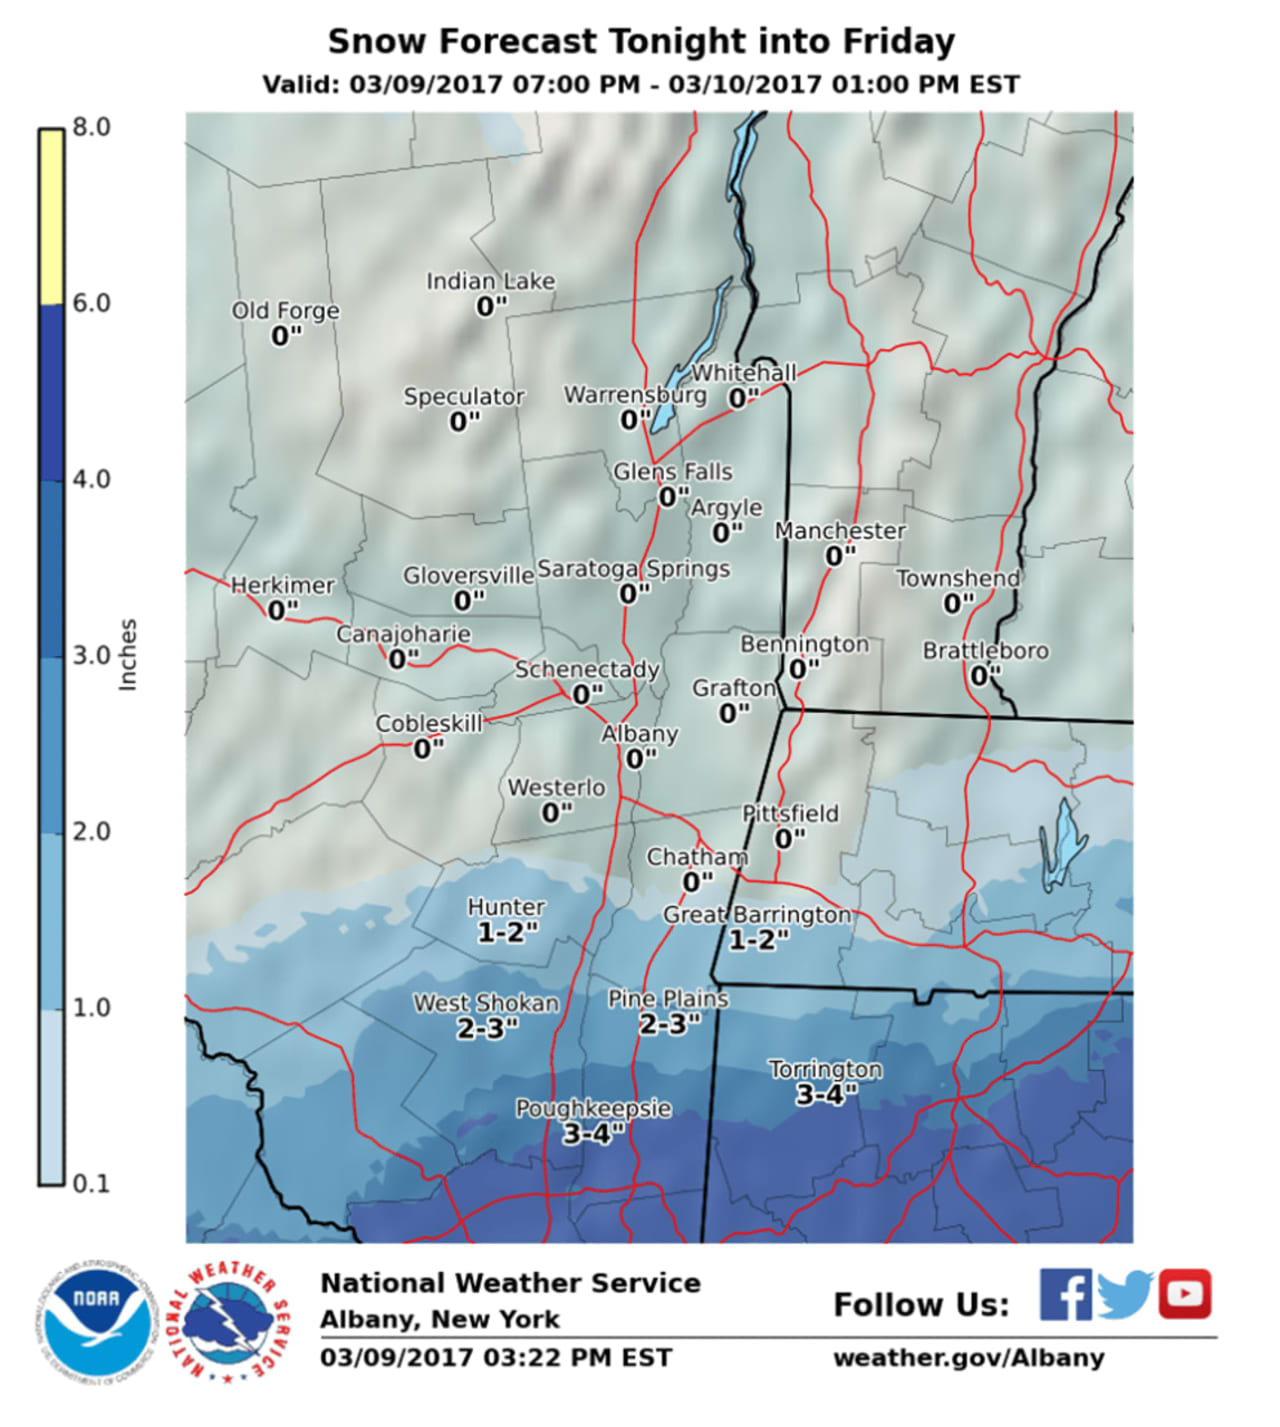 A look at snowfall projections for Dutchess and surrounding areas.